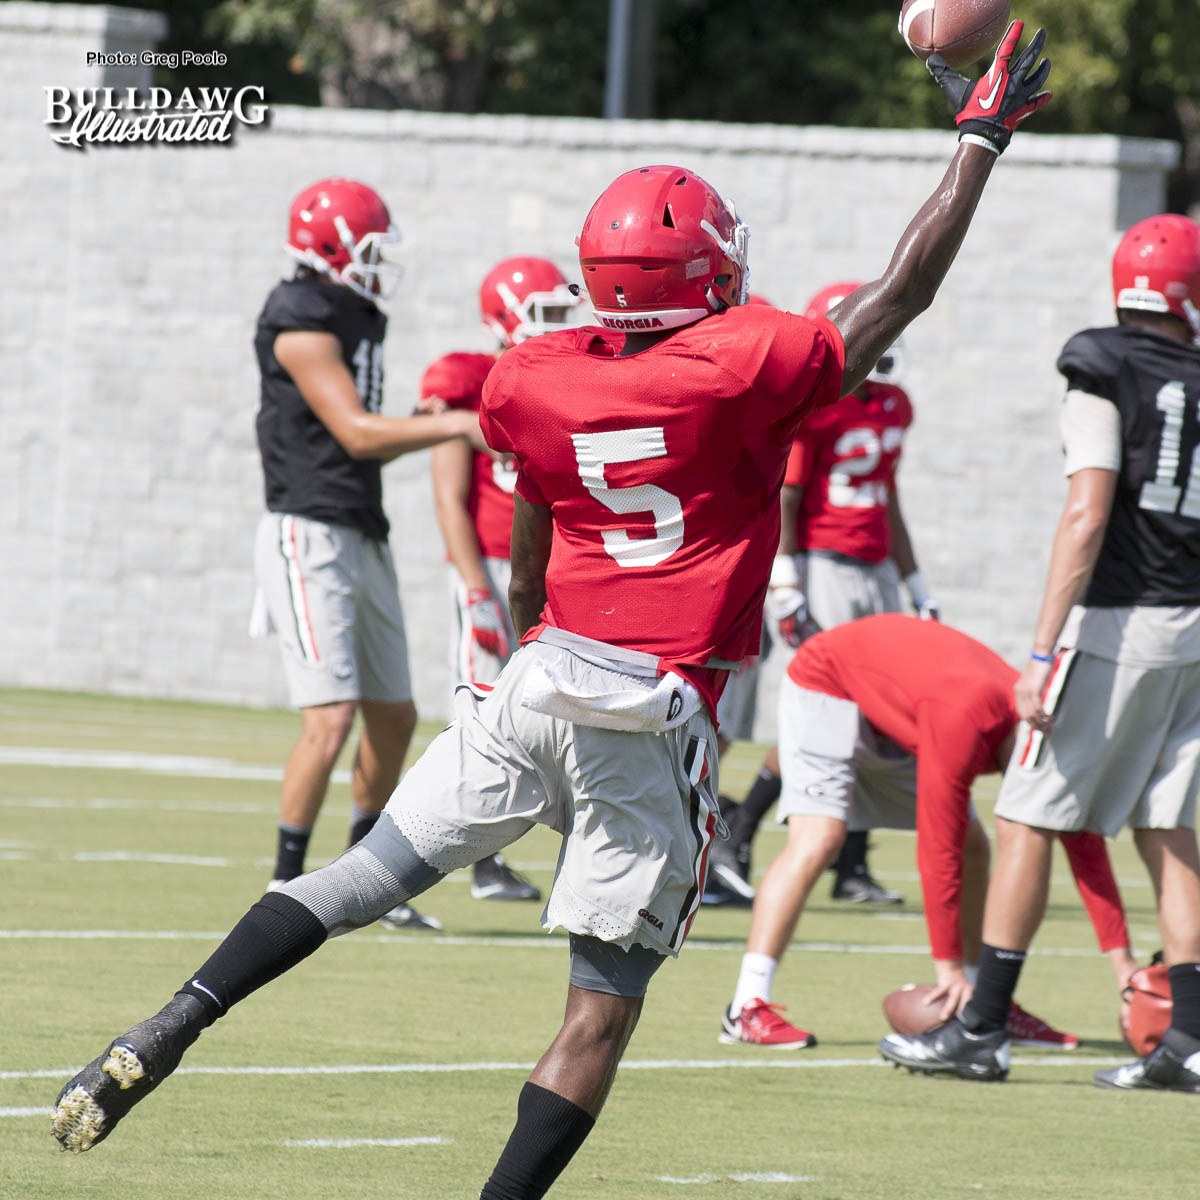 Terry Godwin (5) doing his Odell Beckham, Jr. impersonation during practice on Tuesday - UGA Fall Camp - Practice No. 20 - August 22, 2017